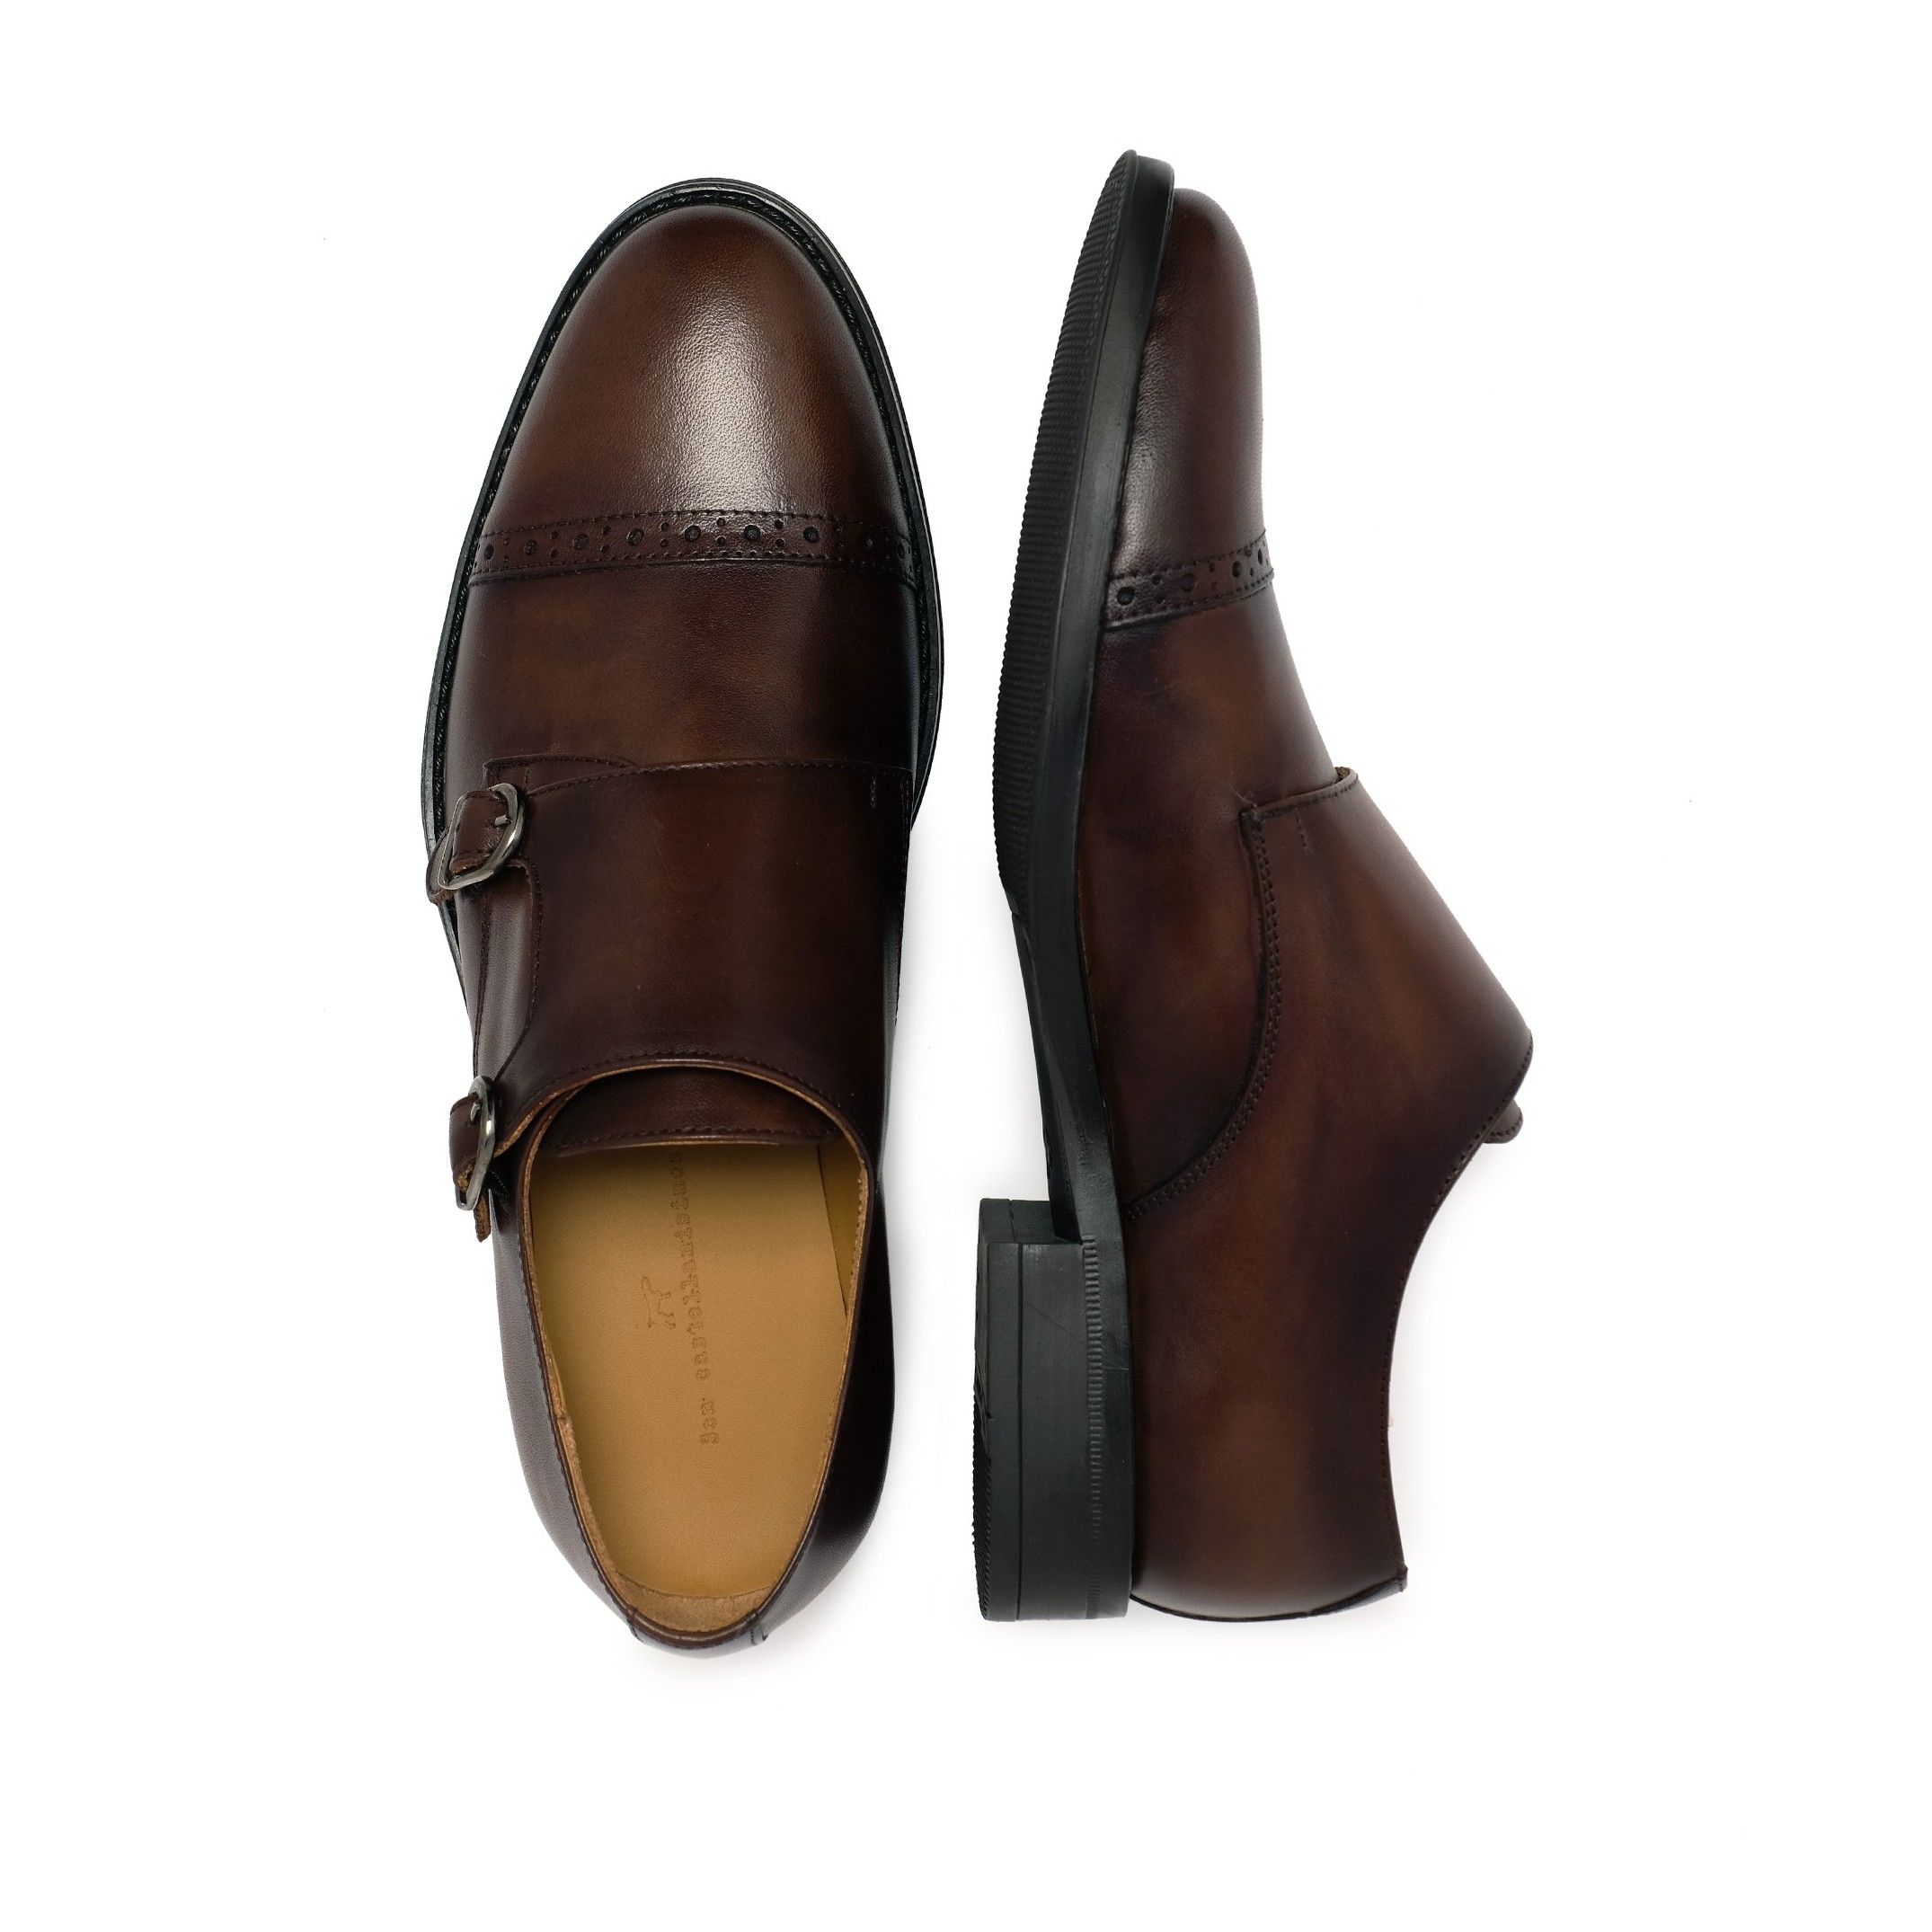 Monkstrap shoes in florentic leather. Closure: metalic buckle. Upper: florentic leather. Inner and insole: leather. Sole: Synthetic leather (better in durability and waterproofness). MADE IN SPAIN.